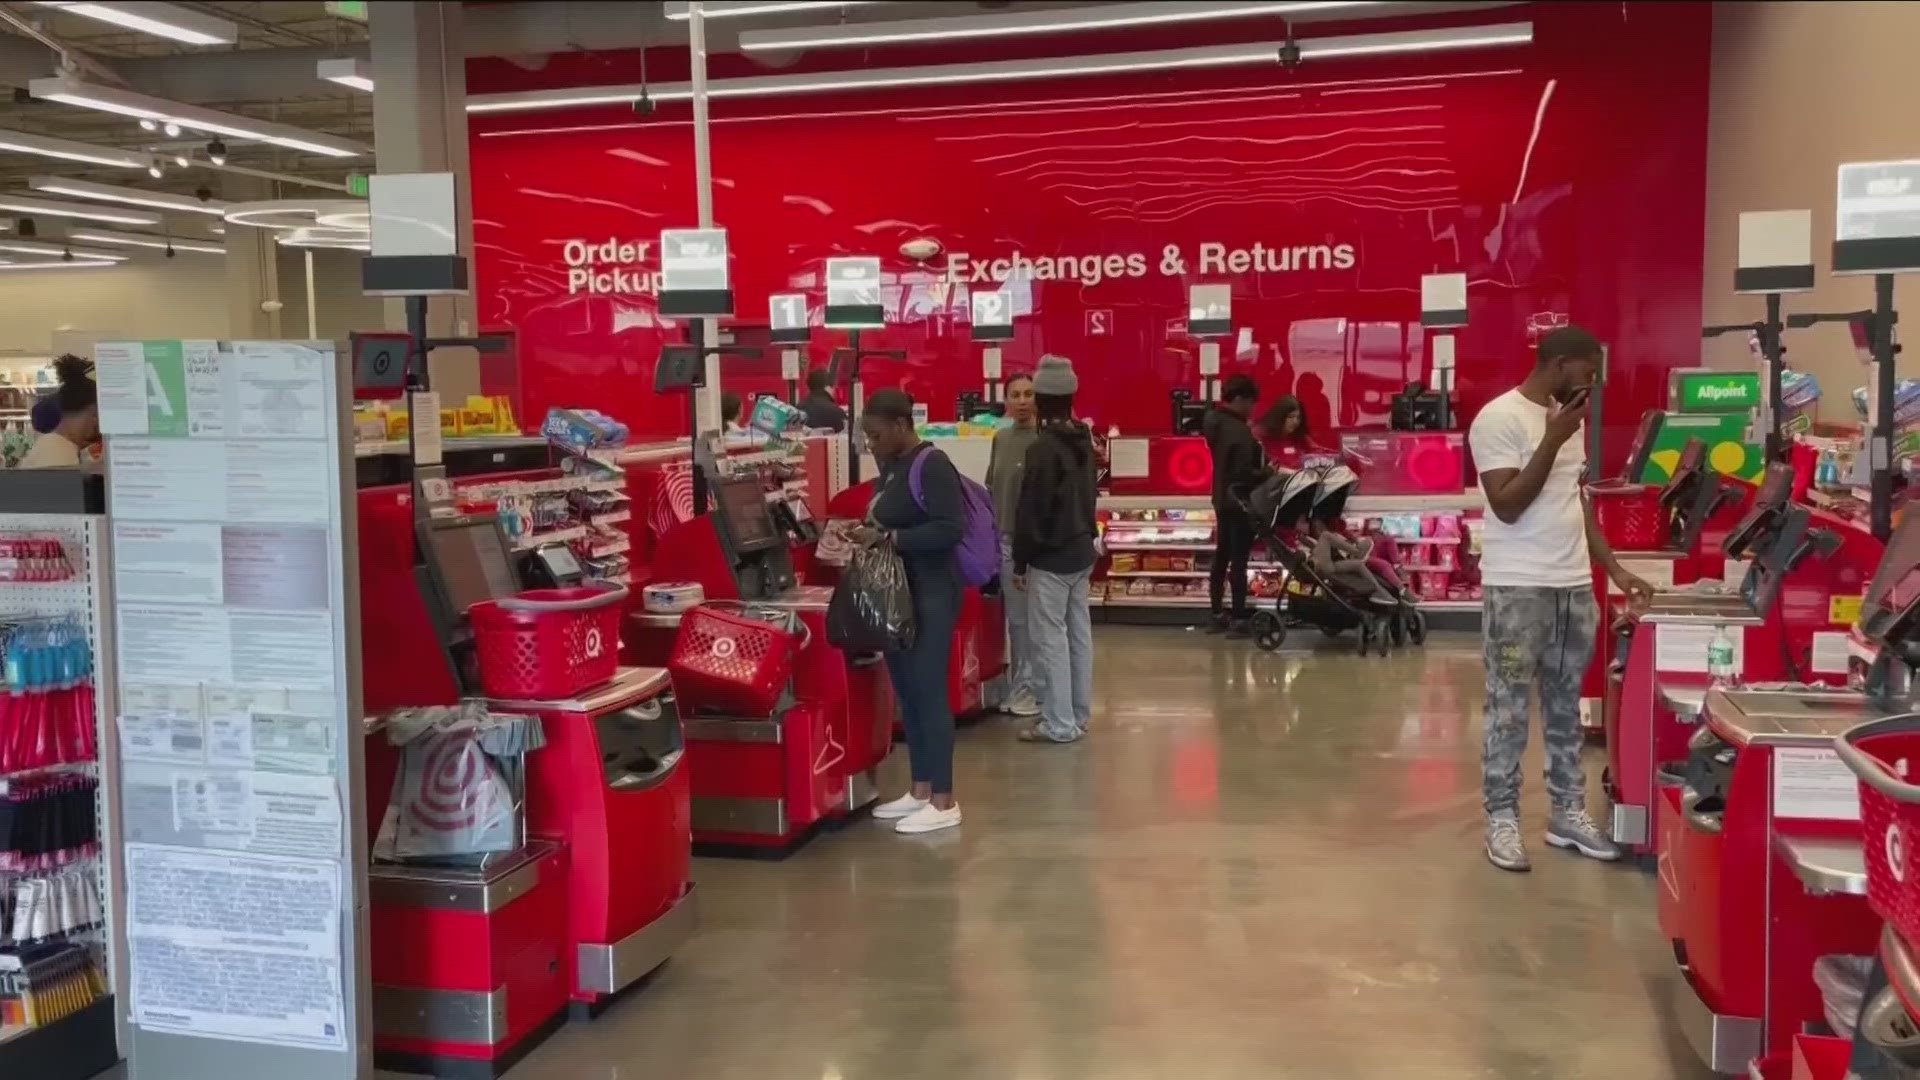 Target rolls out new self-checkout technology to crack down on thefts